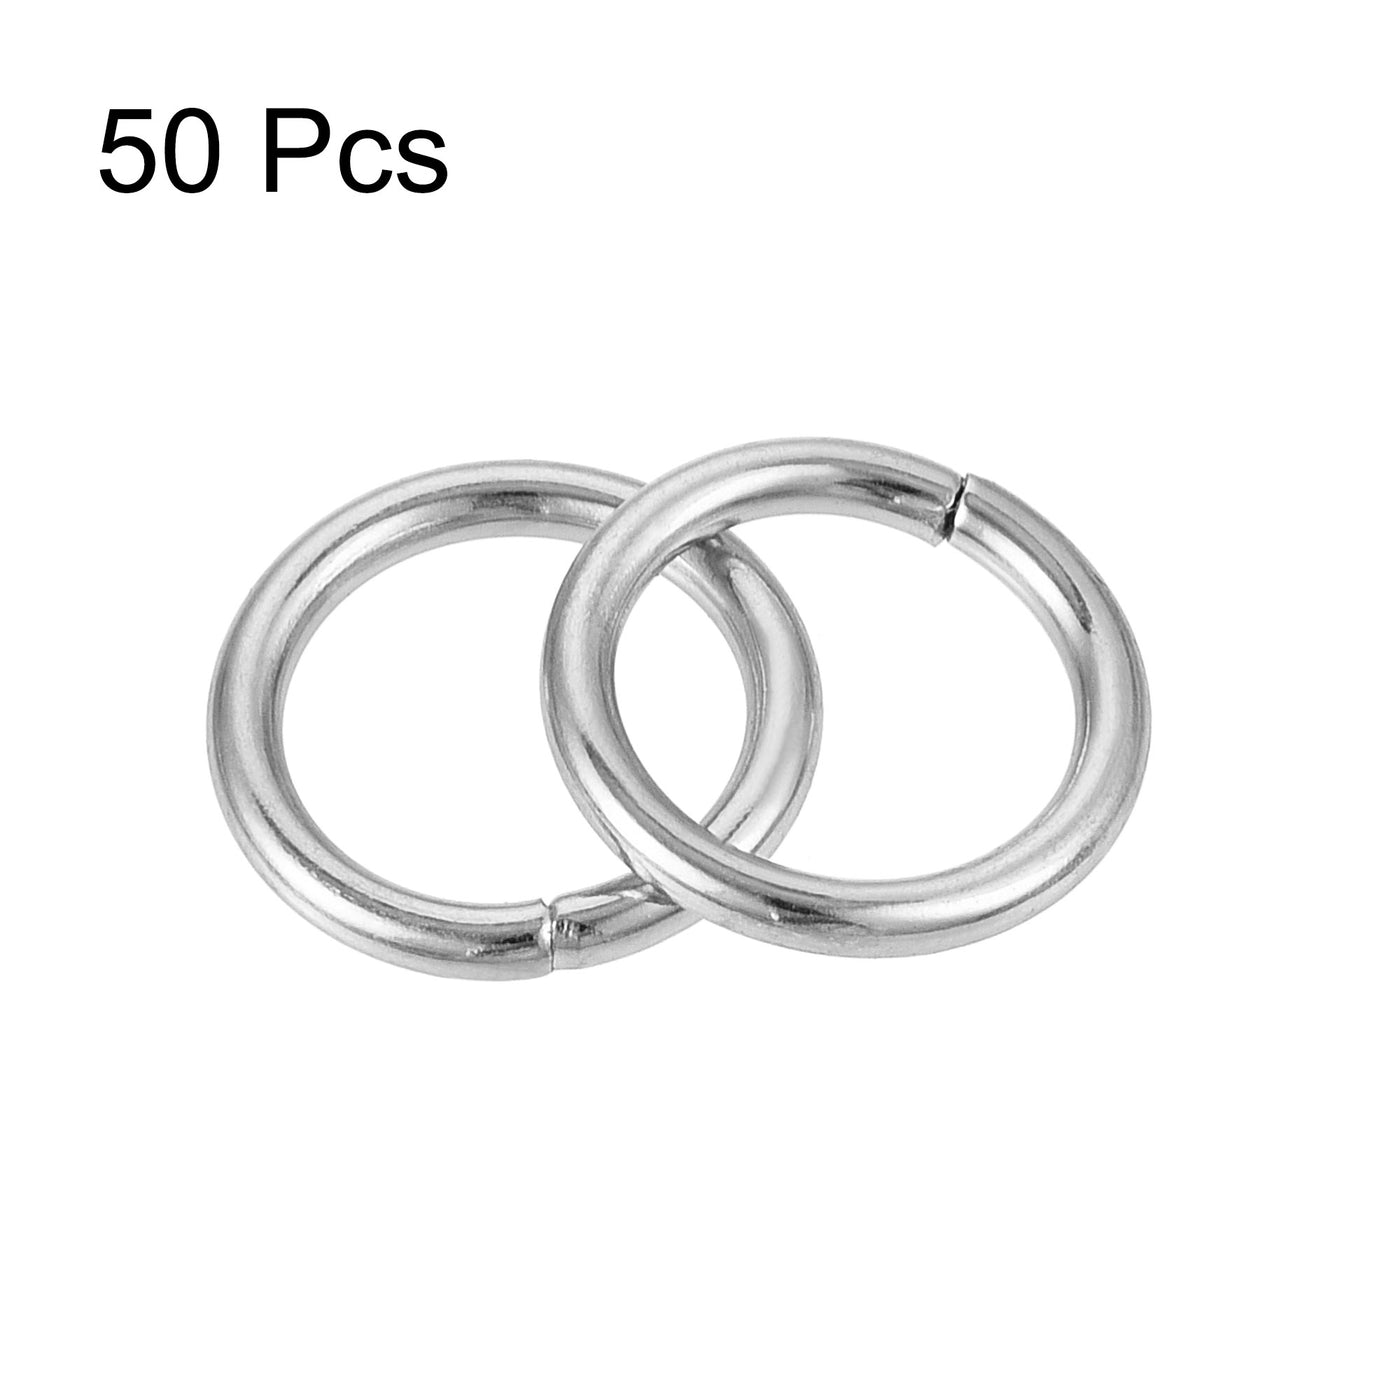 uxcell Uxcell 10mm Metal O Rings Non-Welded for Straps Bags Belts DIY Silver Tone 50pcs